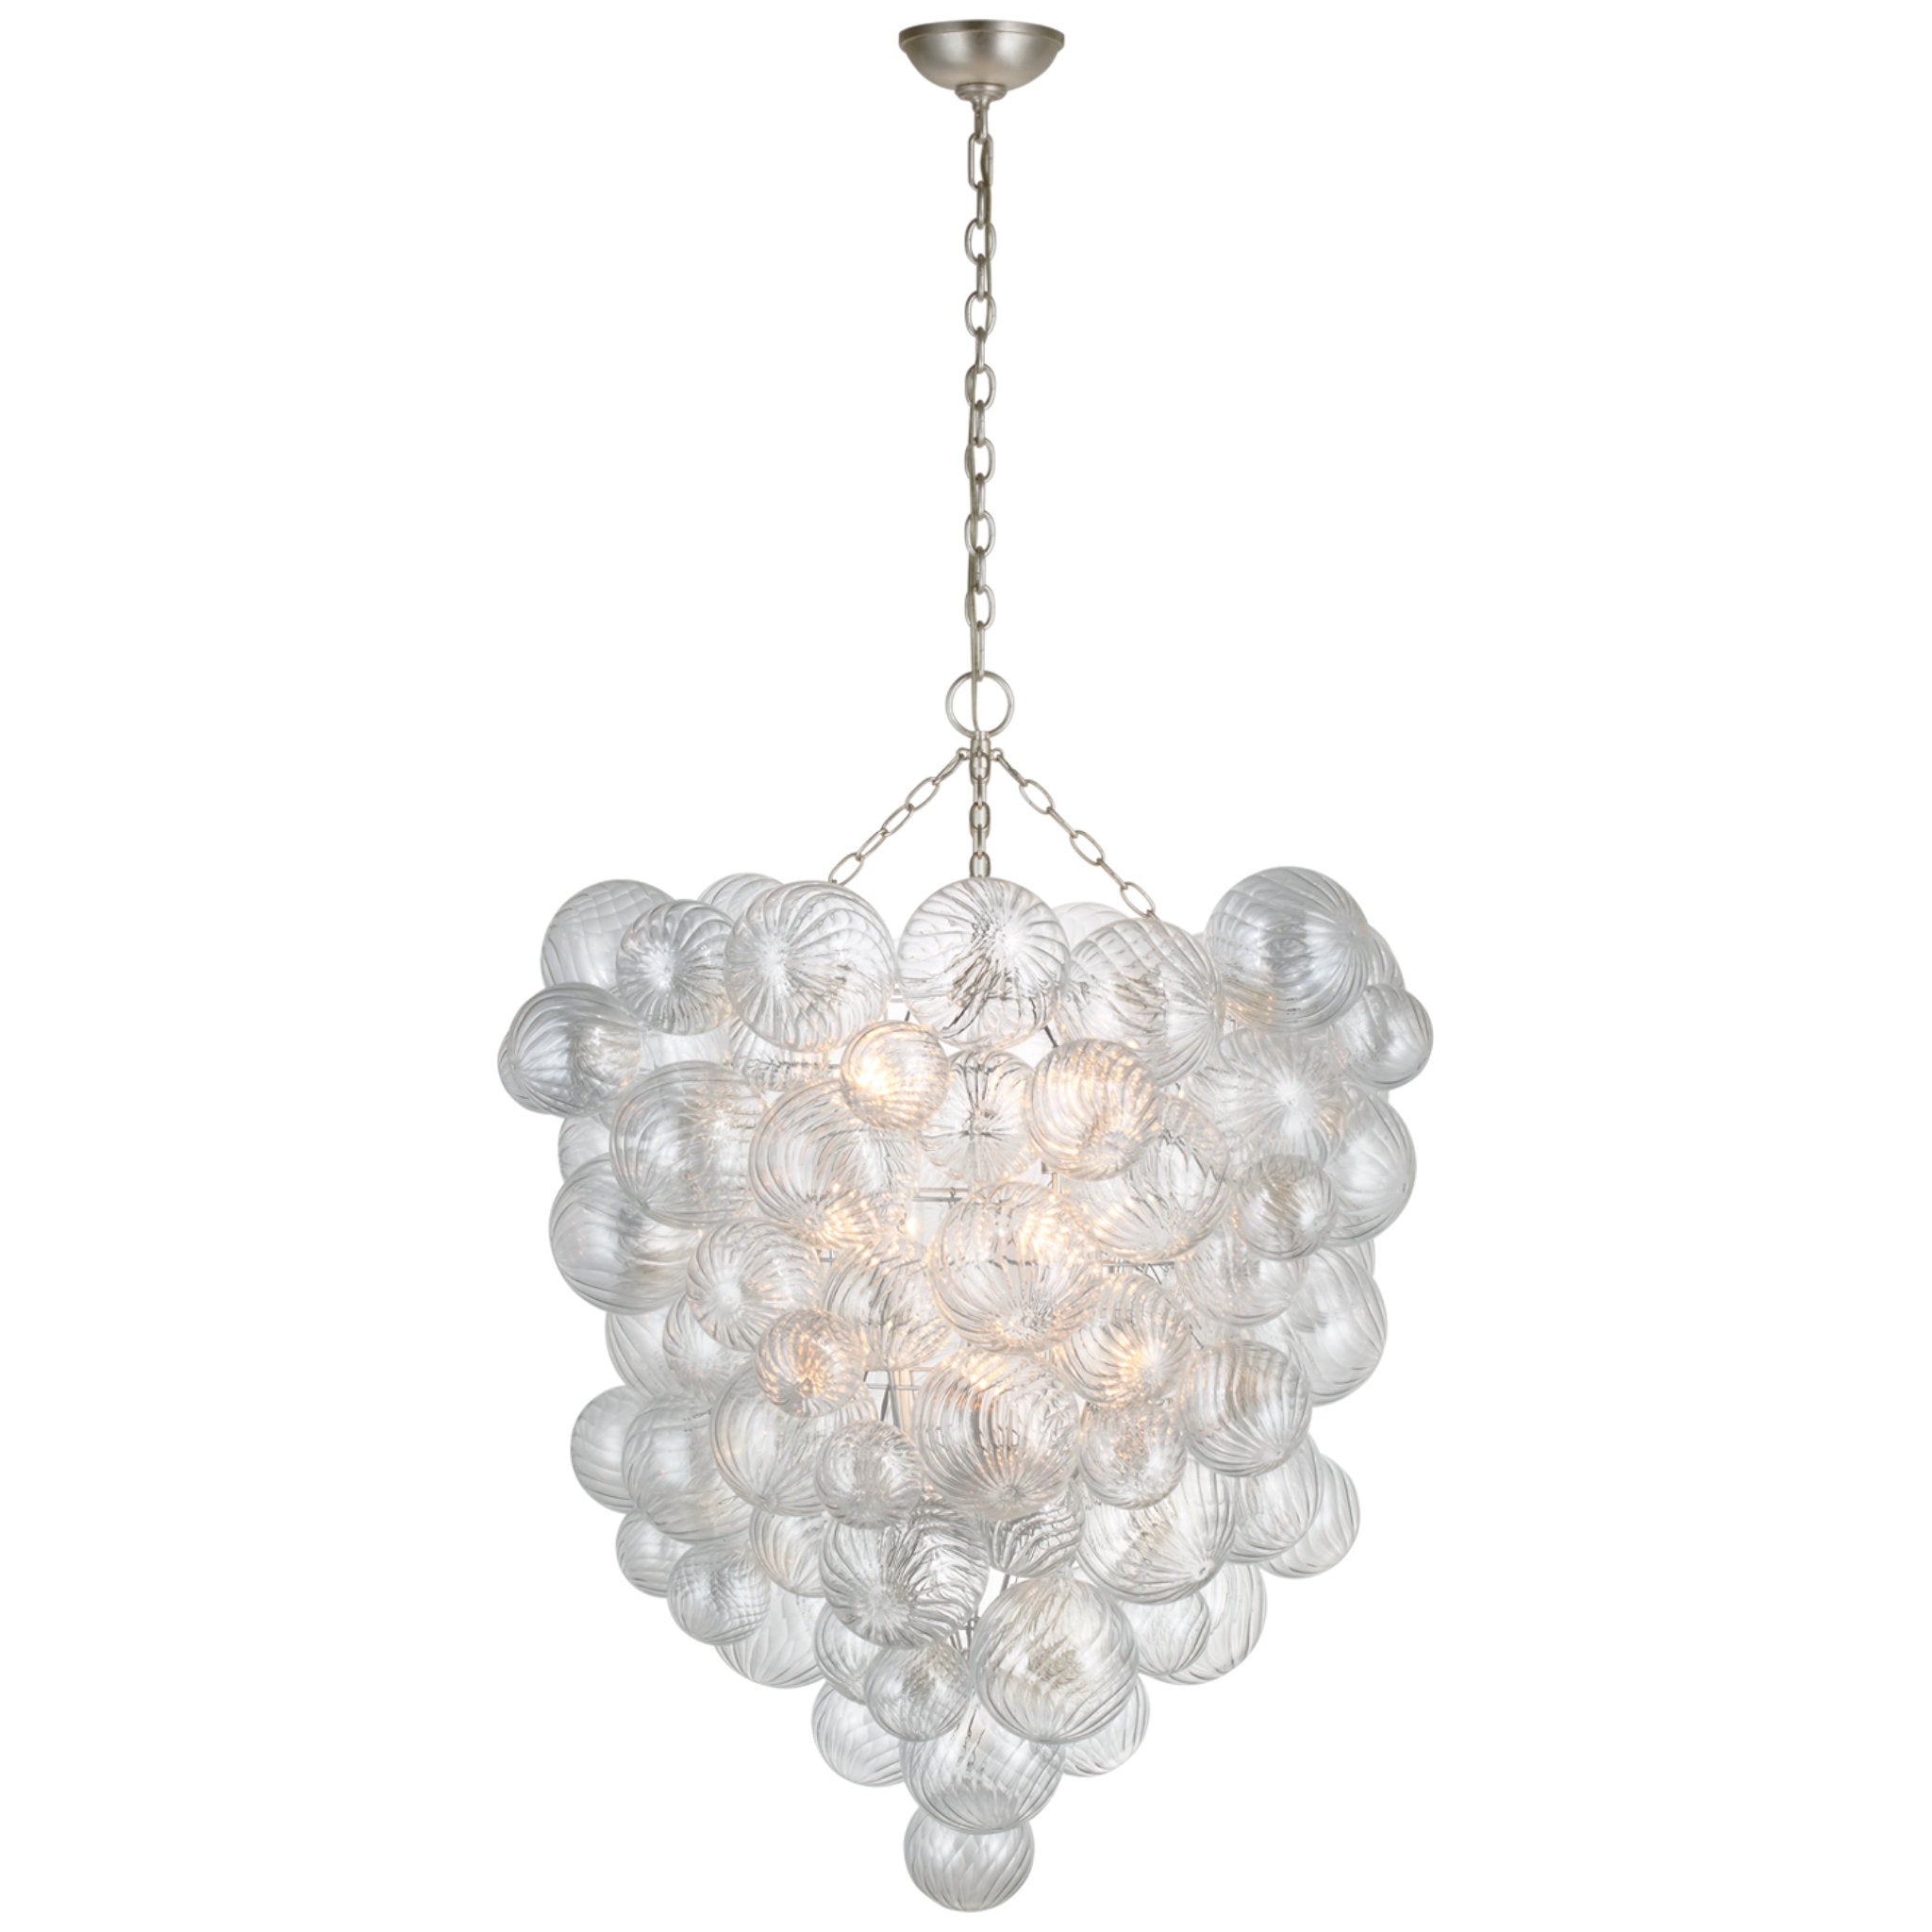 Julie Neill Talia Grande Entry Chandelier in Burnished Silver Leaf with Clear Swirled Glass